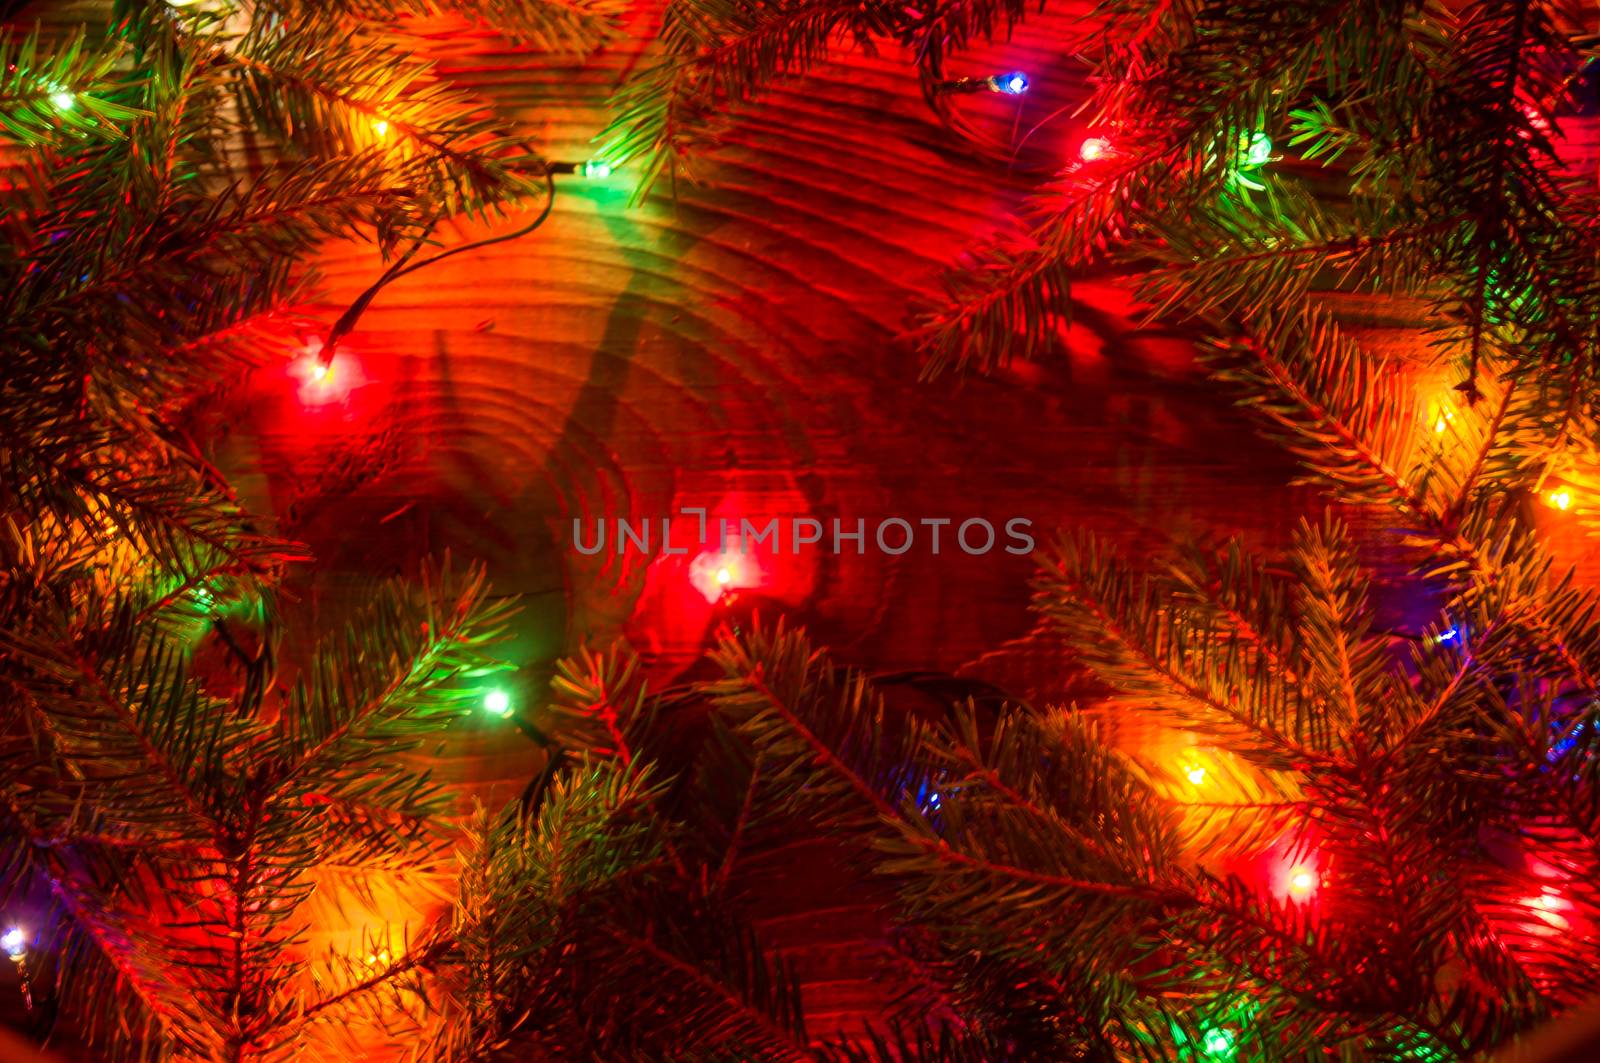 Christmas lights on wooden background. For your commercial and editorial use